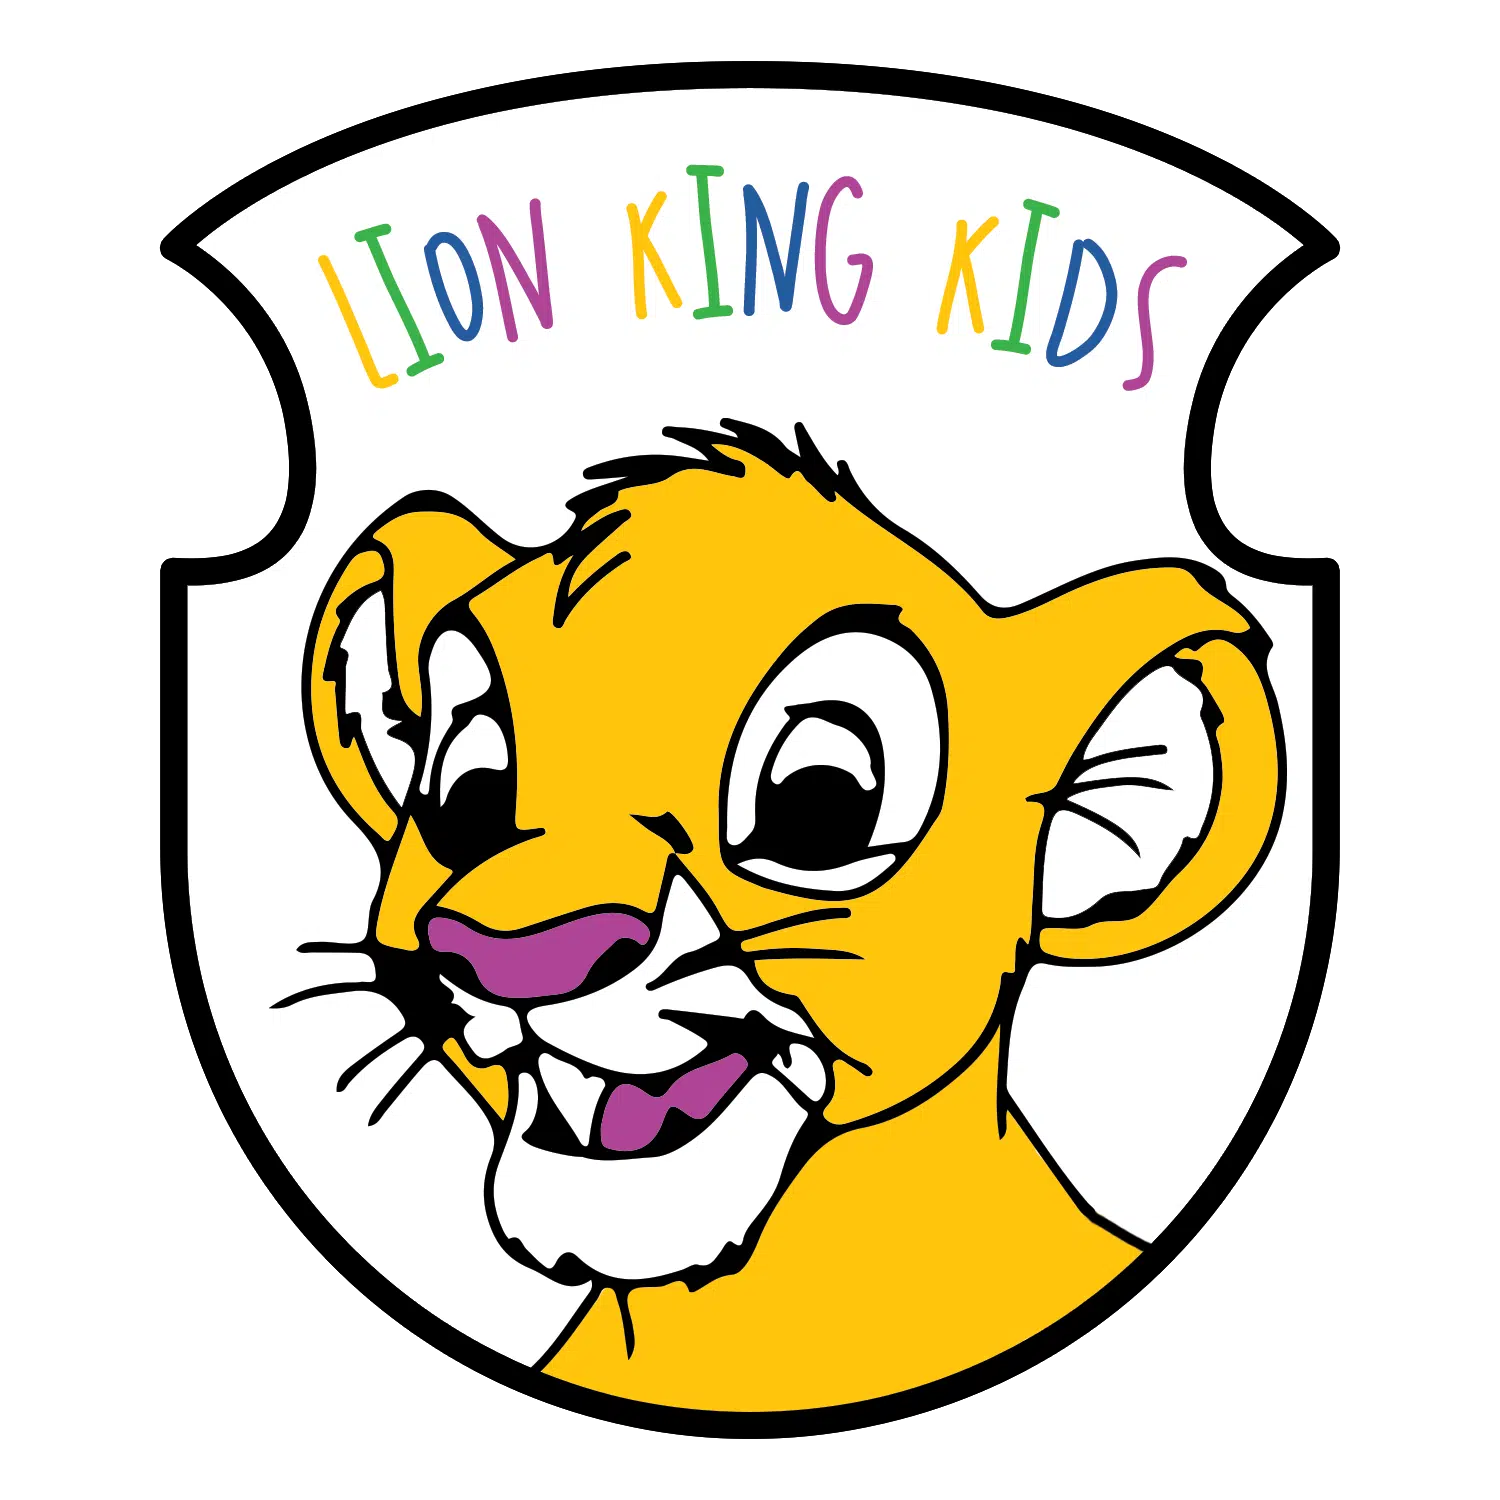 Musical: The Lion King Kids